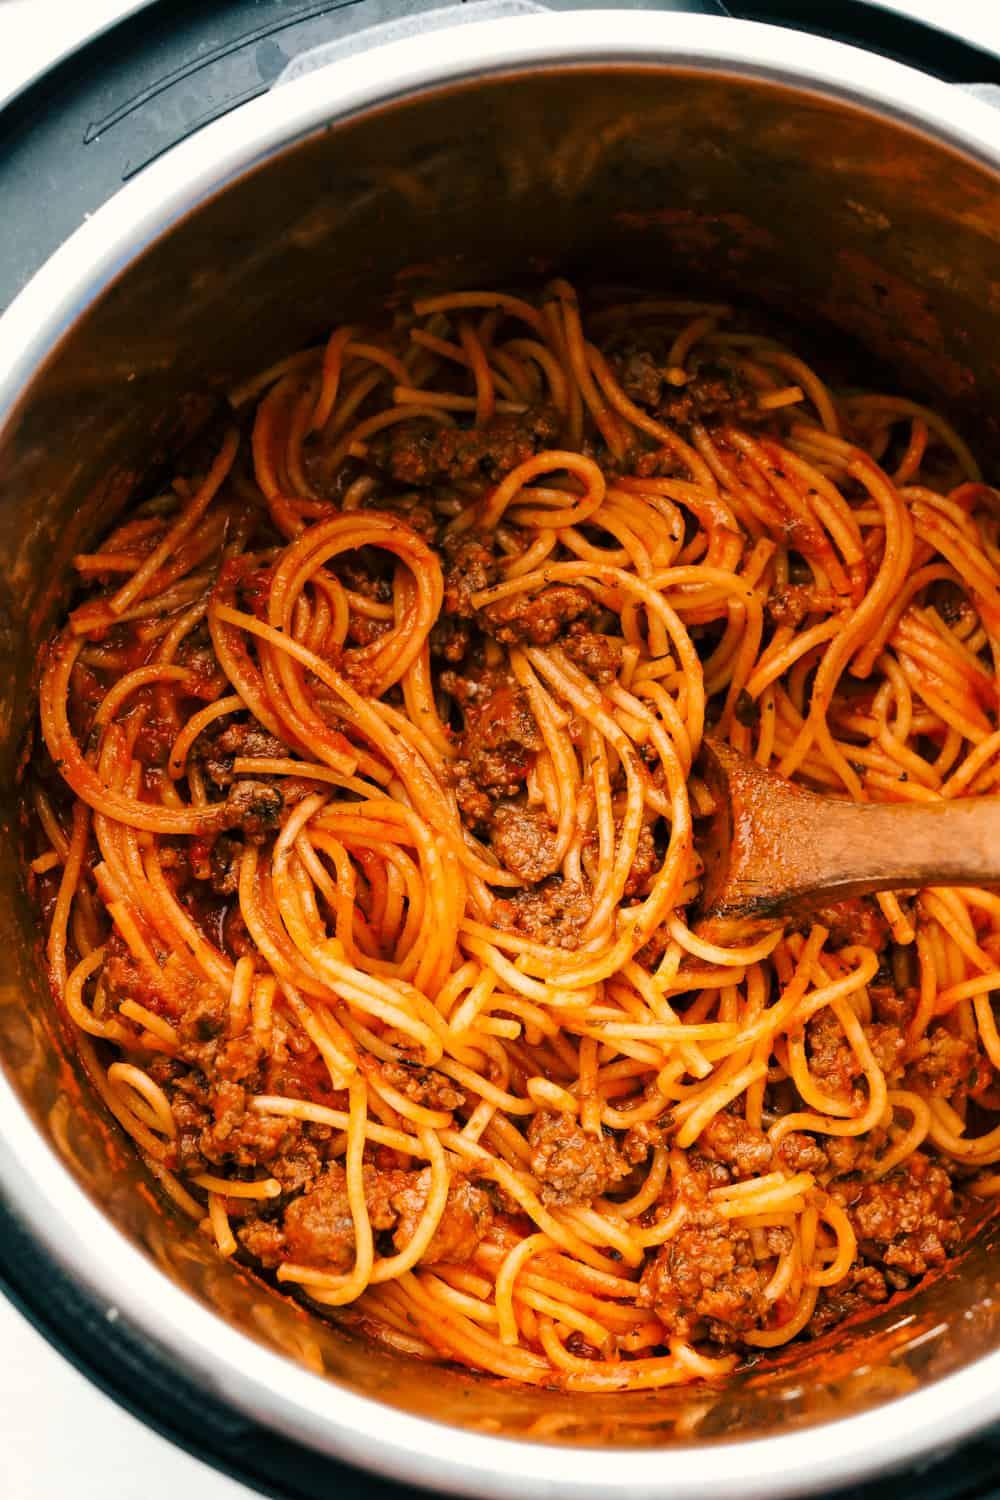 Browning, seasoning and cooking spaghetti in the instant pot.